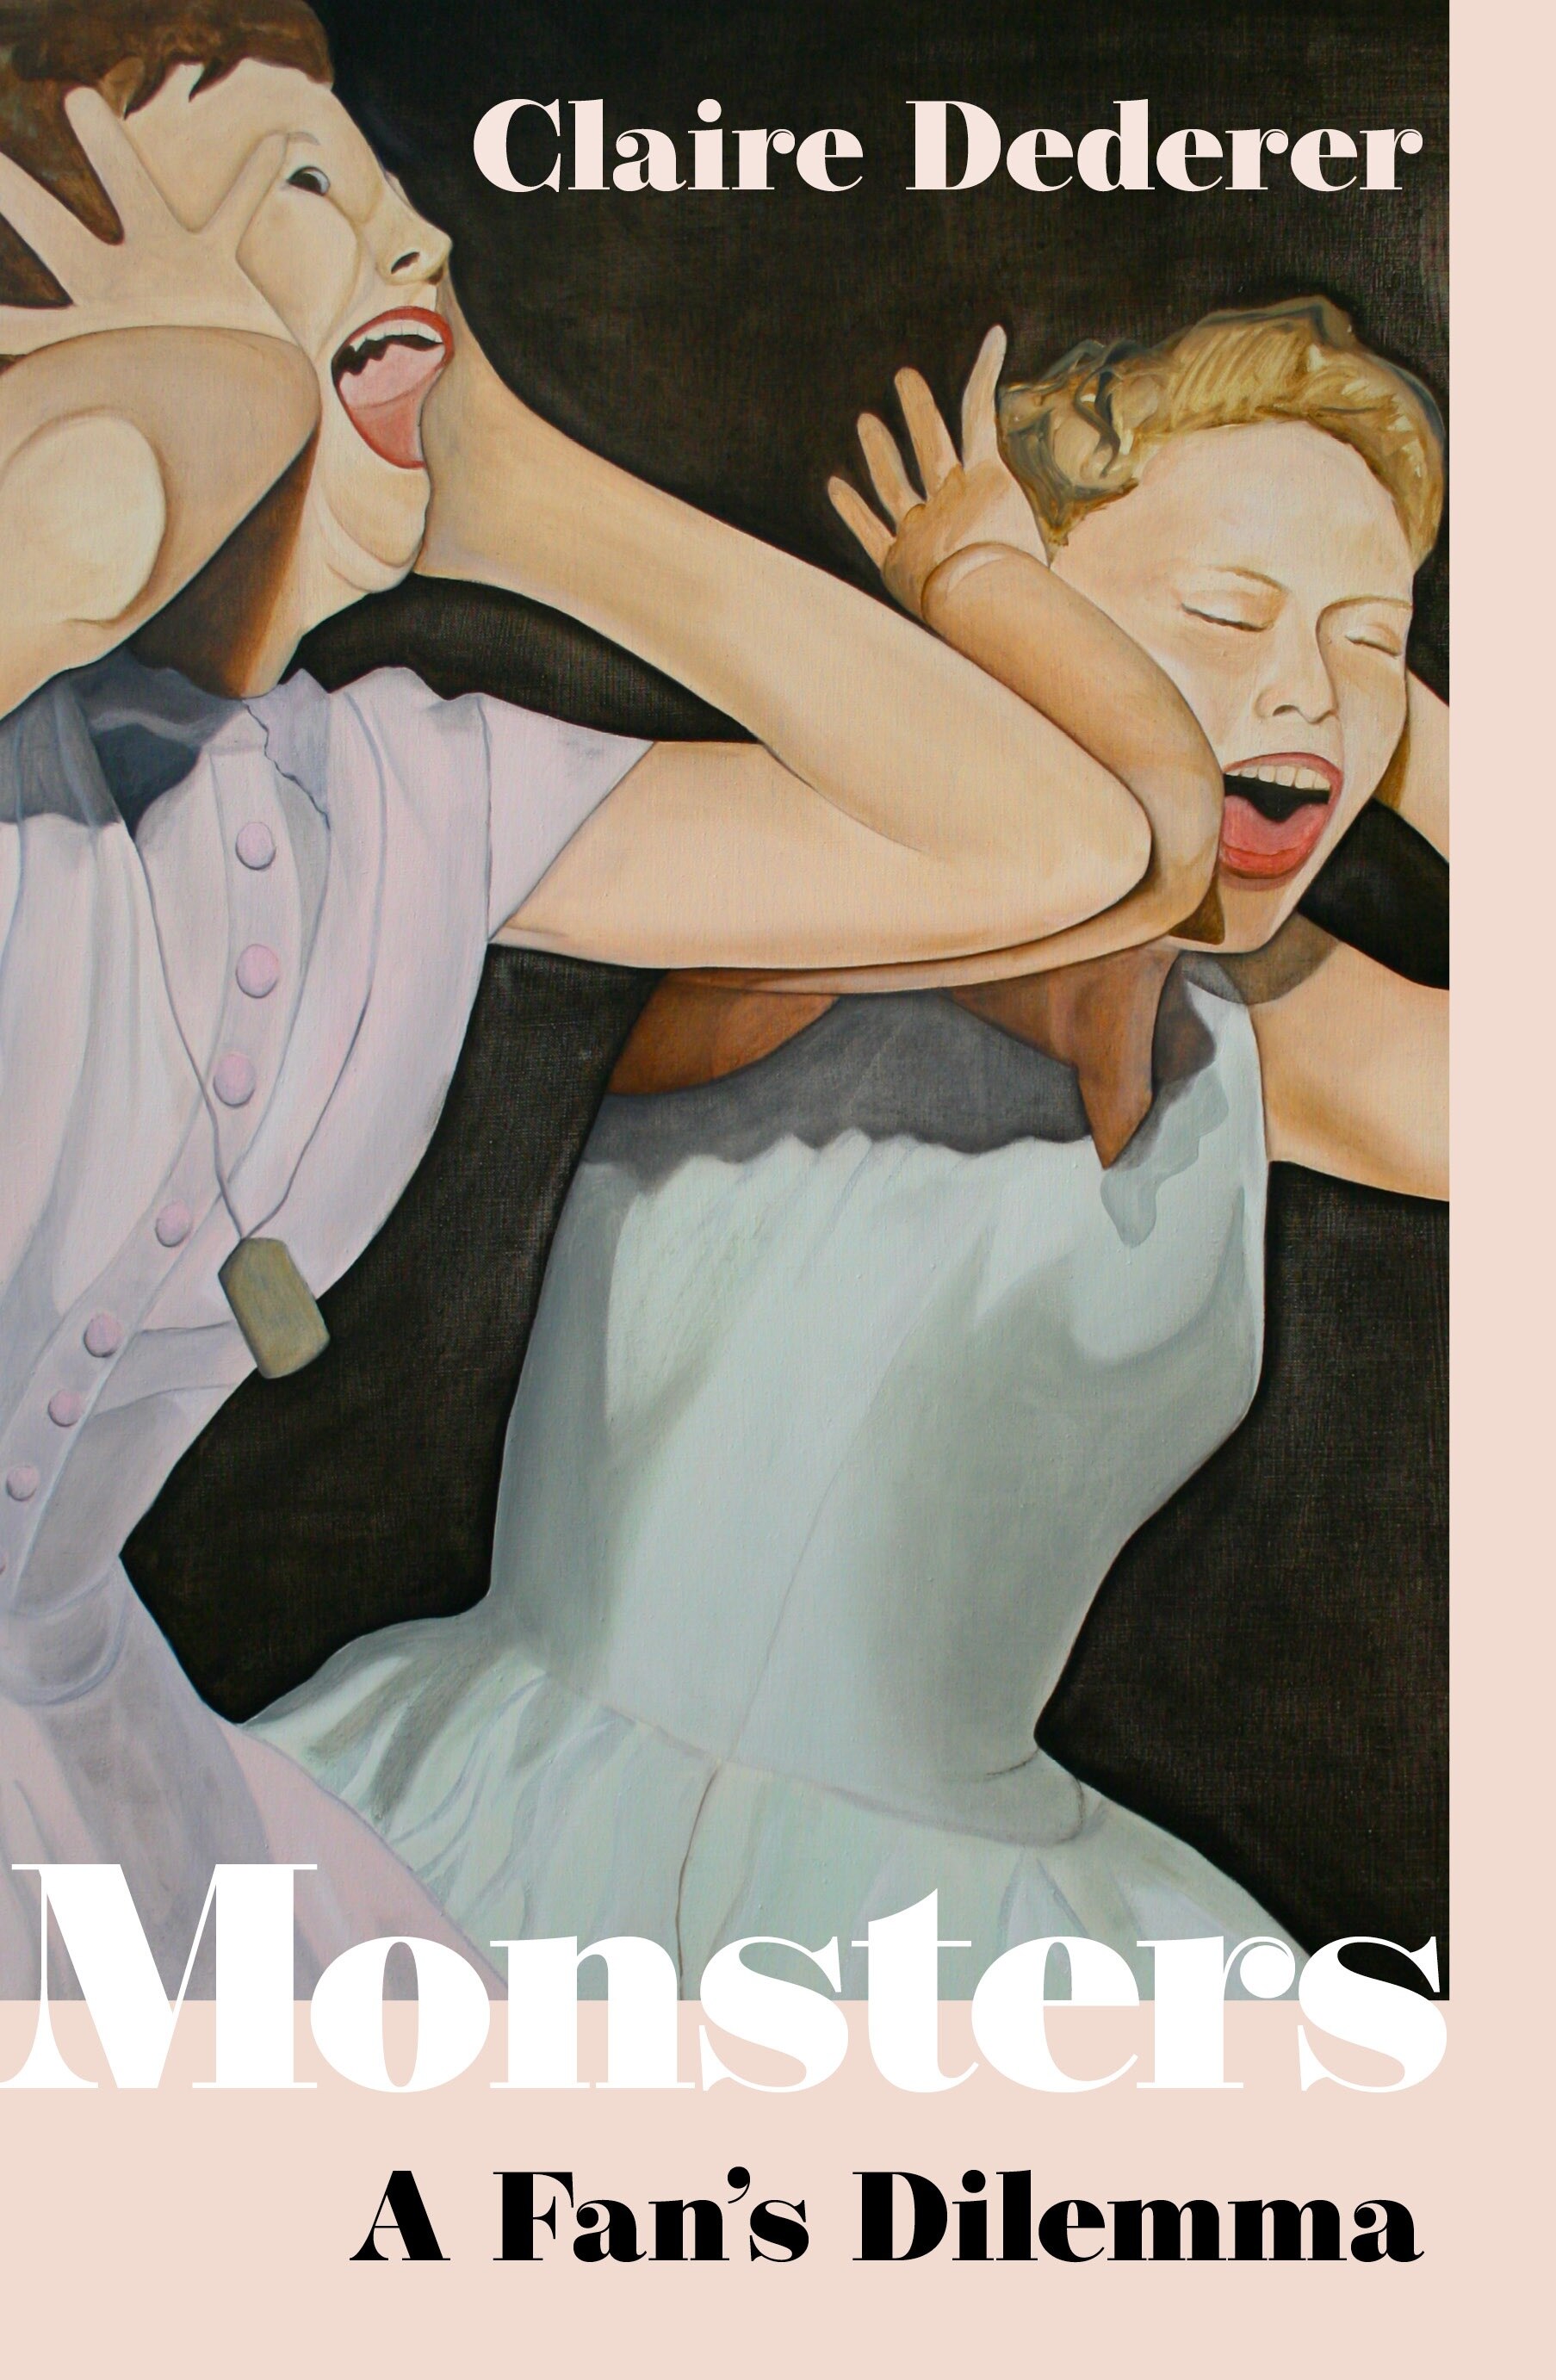 A book cover showing a painting of two women in 50s-style garb screaming and holding their hands to their heads